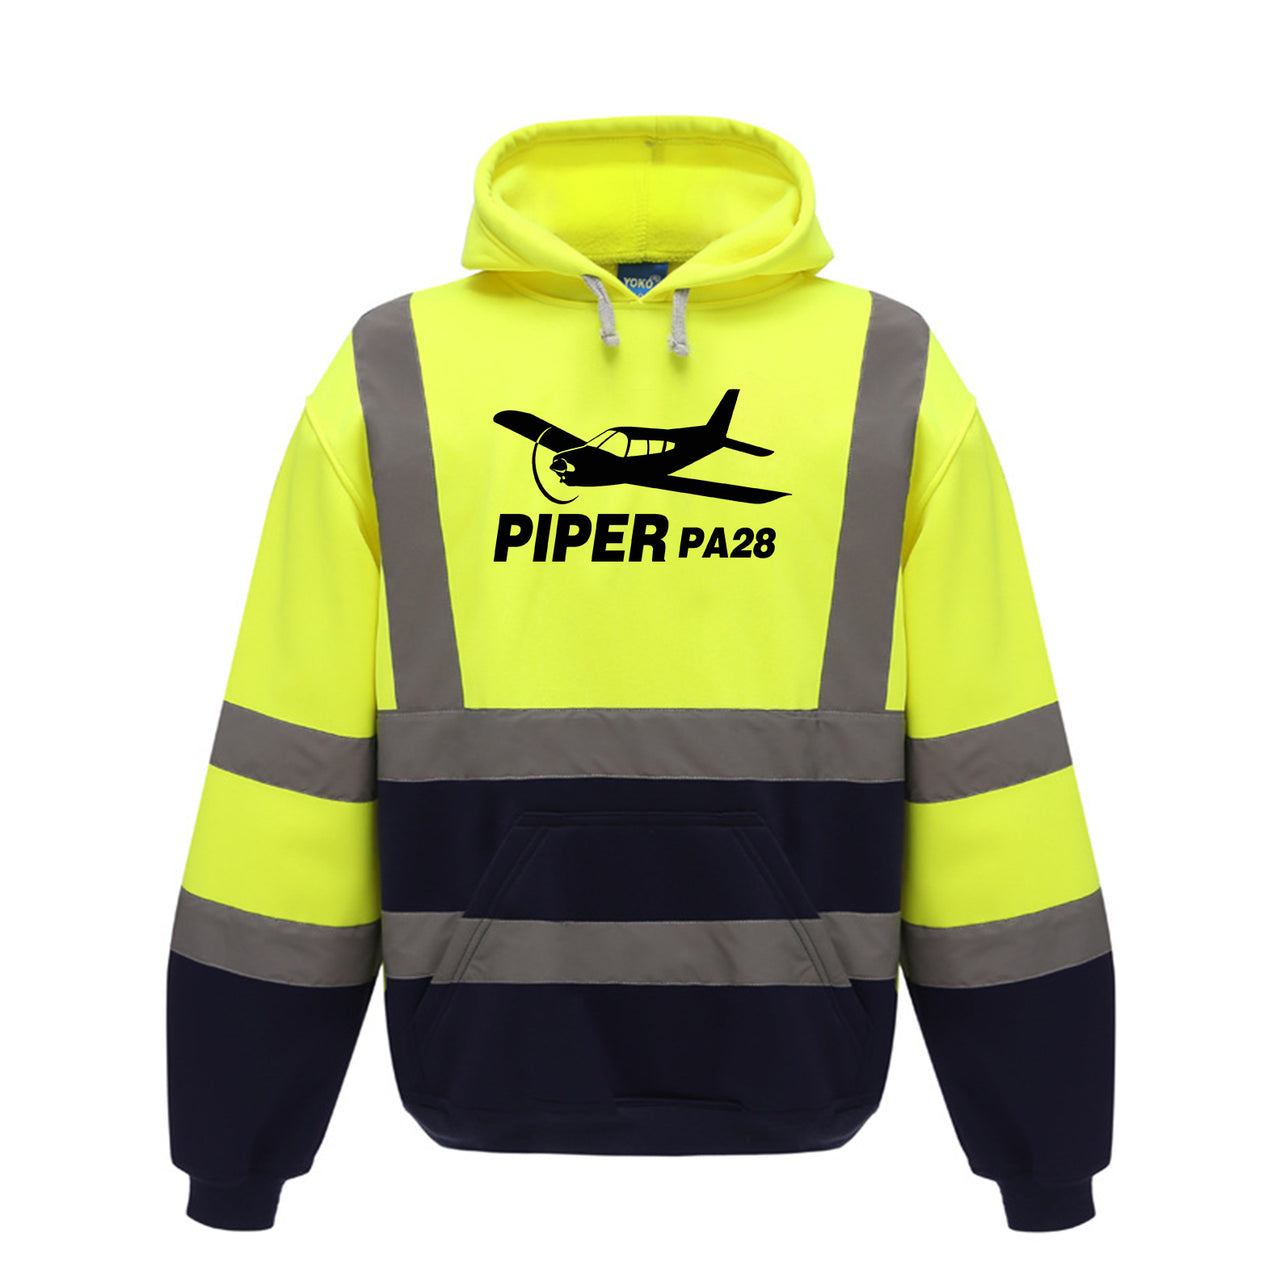 The Piper PA28 Designed Reflective Hoodies